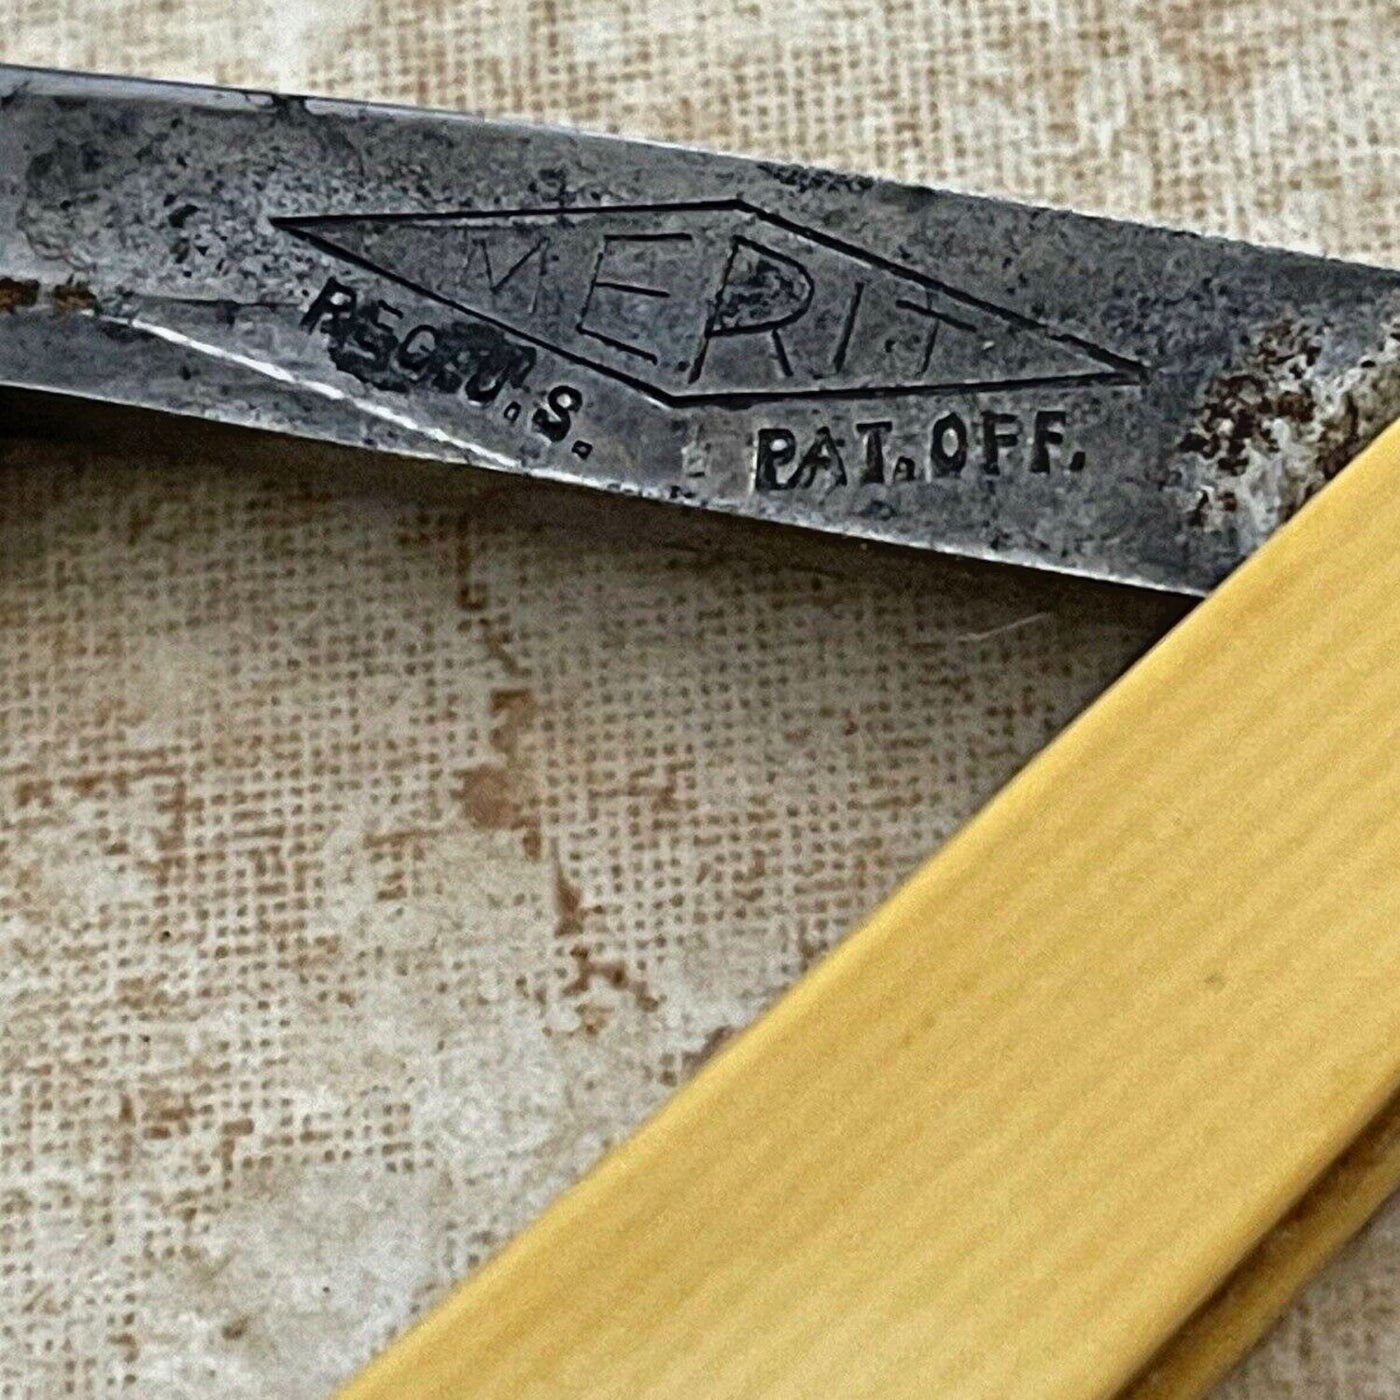  Vintage Peter J Michels Brooklyn New York Straight Razor by Naked Armor sold by Naked Armor Razors